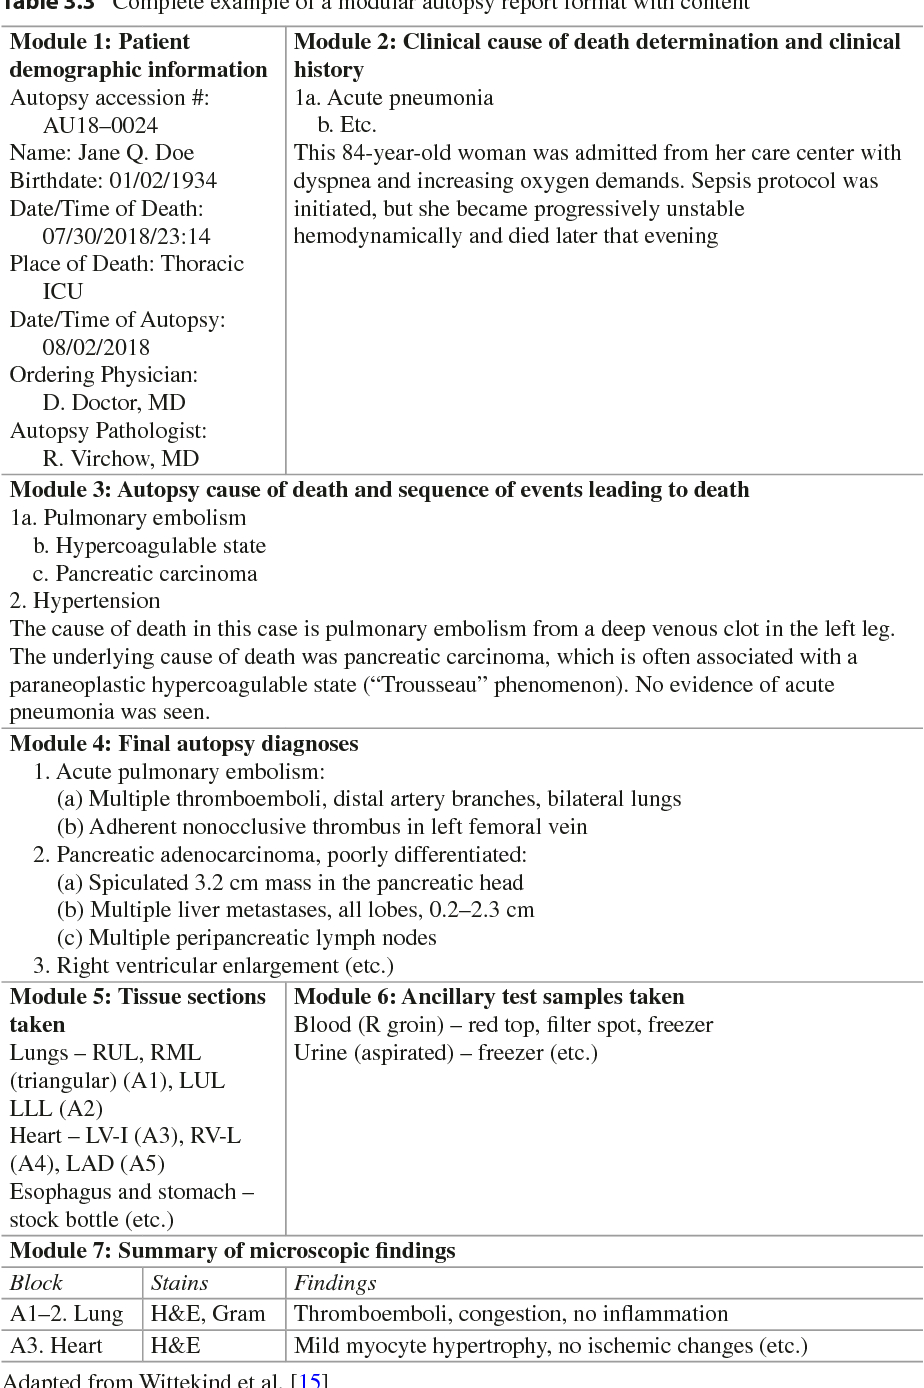 Table 3.3 From Autopsy In The 21St Century | Semantic Scholar Regarding Autopsy Report Template